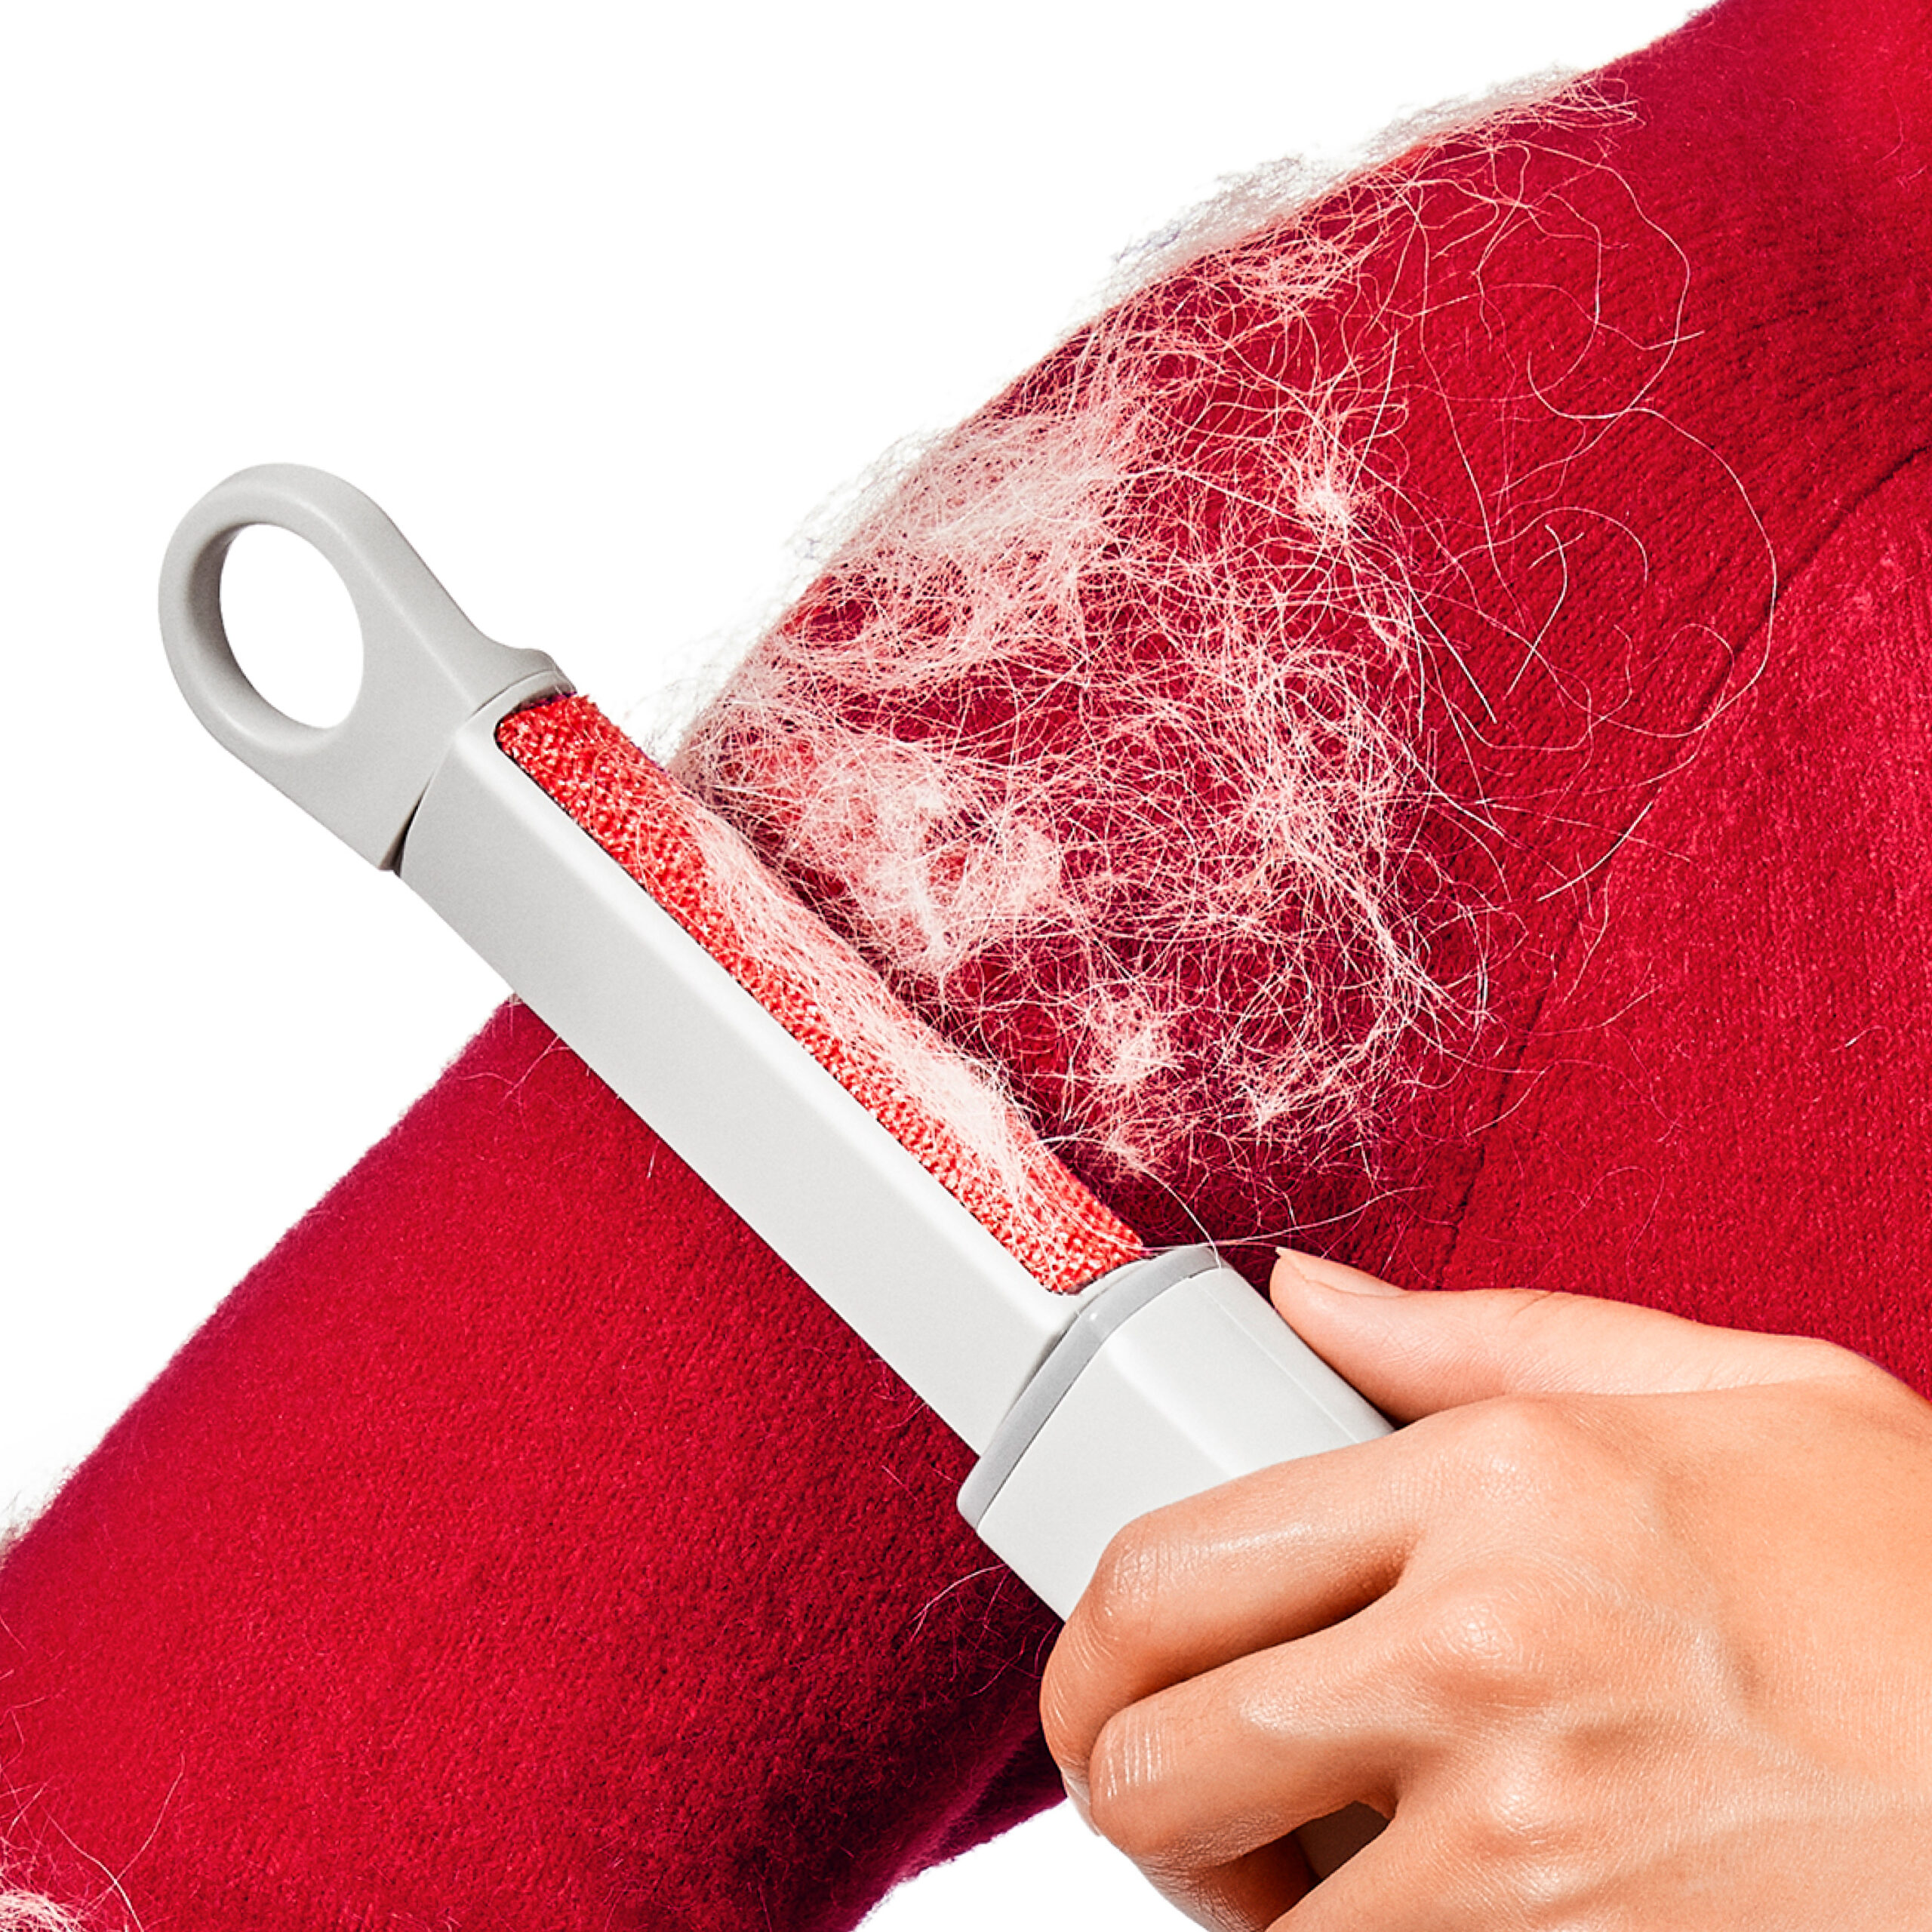 Lint Brush vs. Lint Roller? Which One is Right for You?